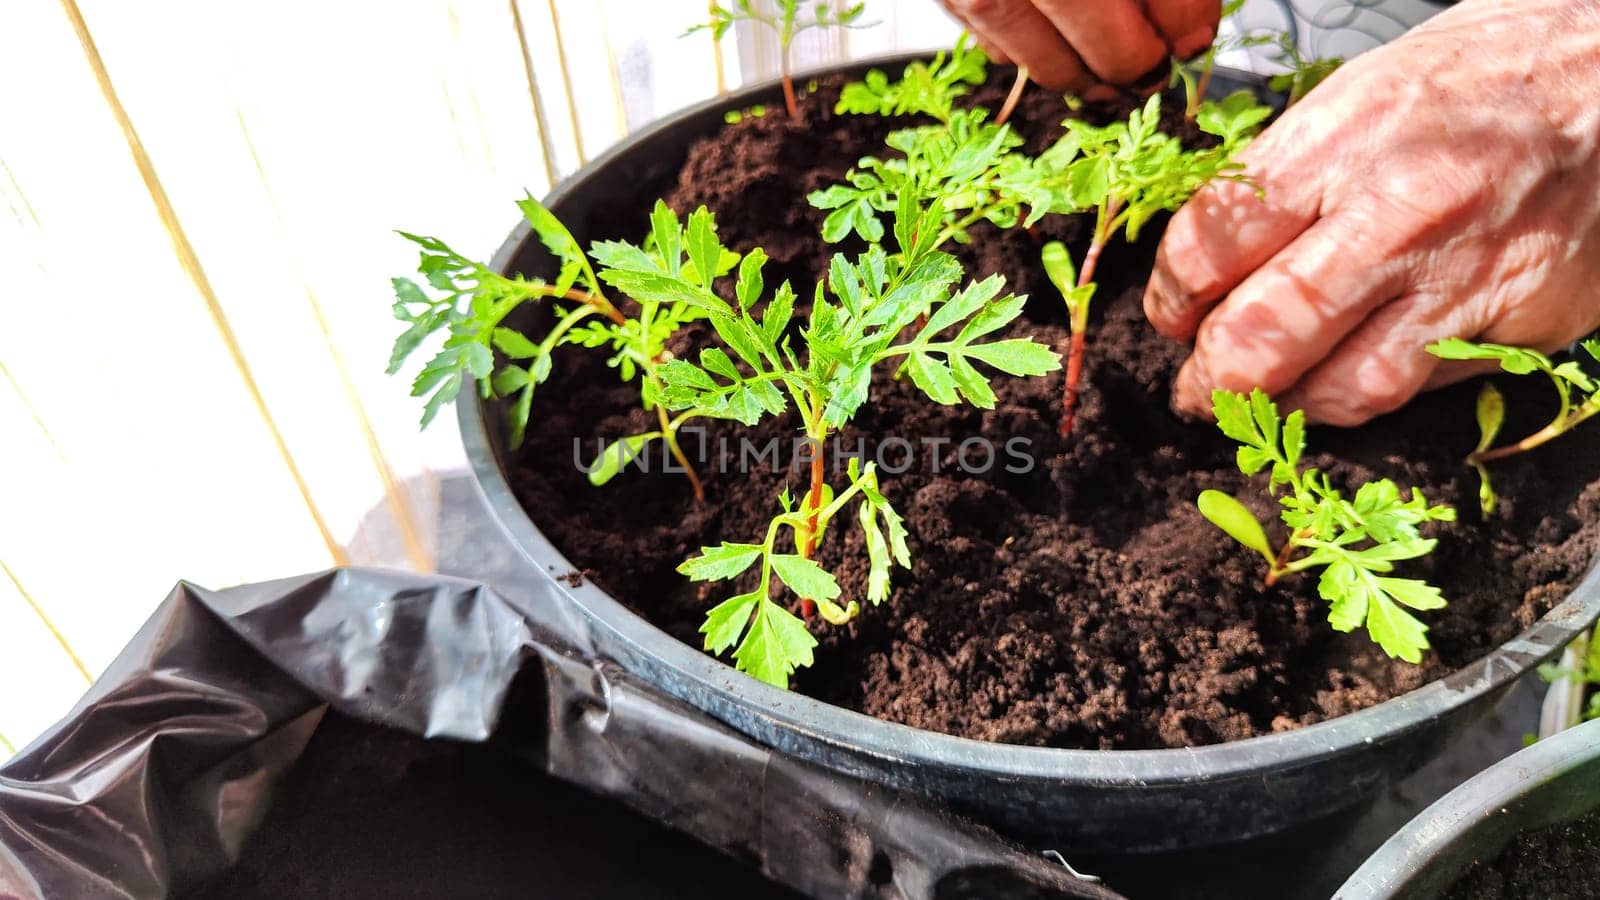 Planting marigold flowers in pot. Reproduction of plants in spring. Young flower shoots and greenery for garden. The hands of an elderly woman, a bucket of earth and green bushes and twigs with leaves by keleny